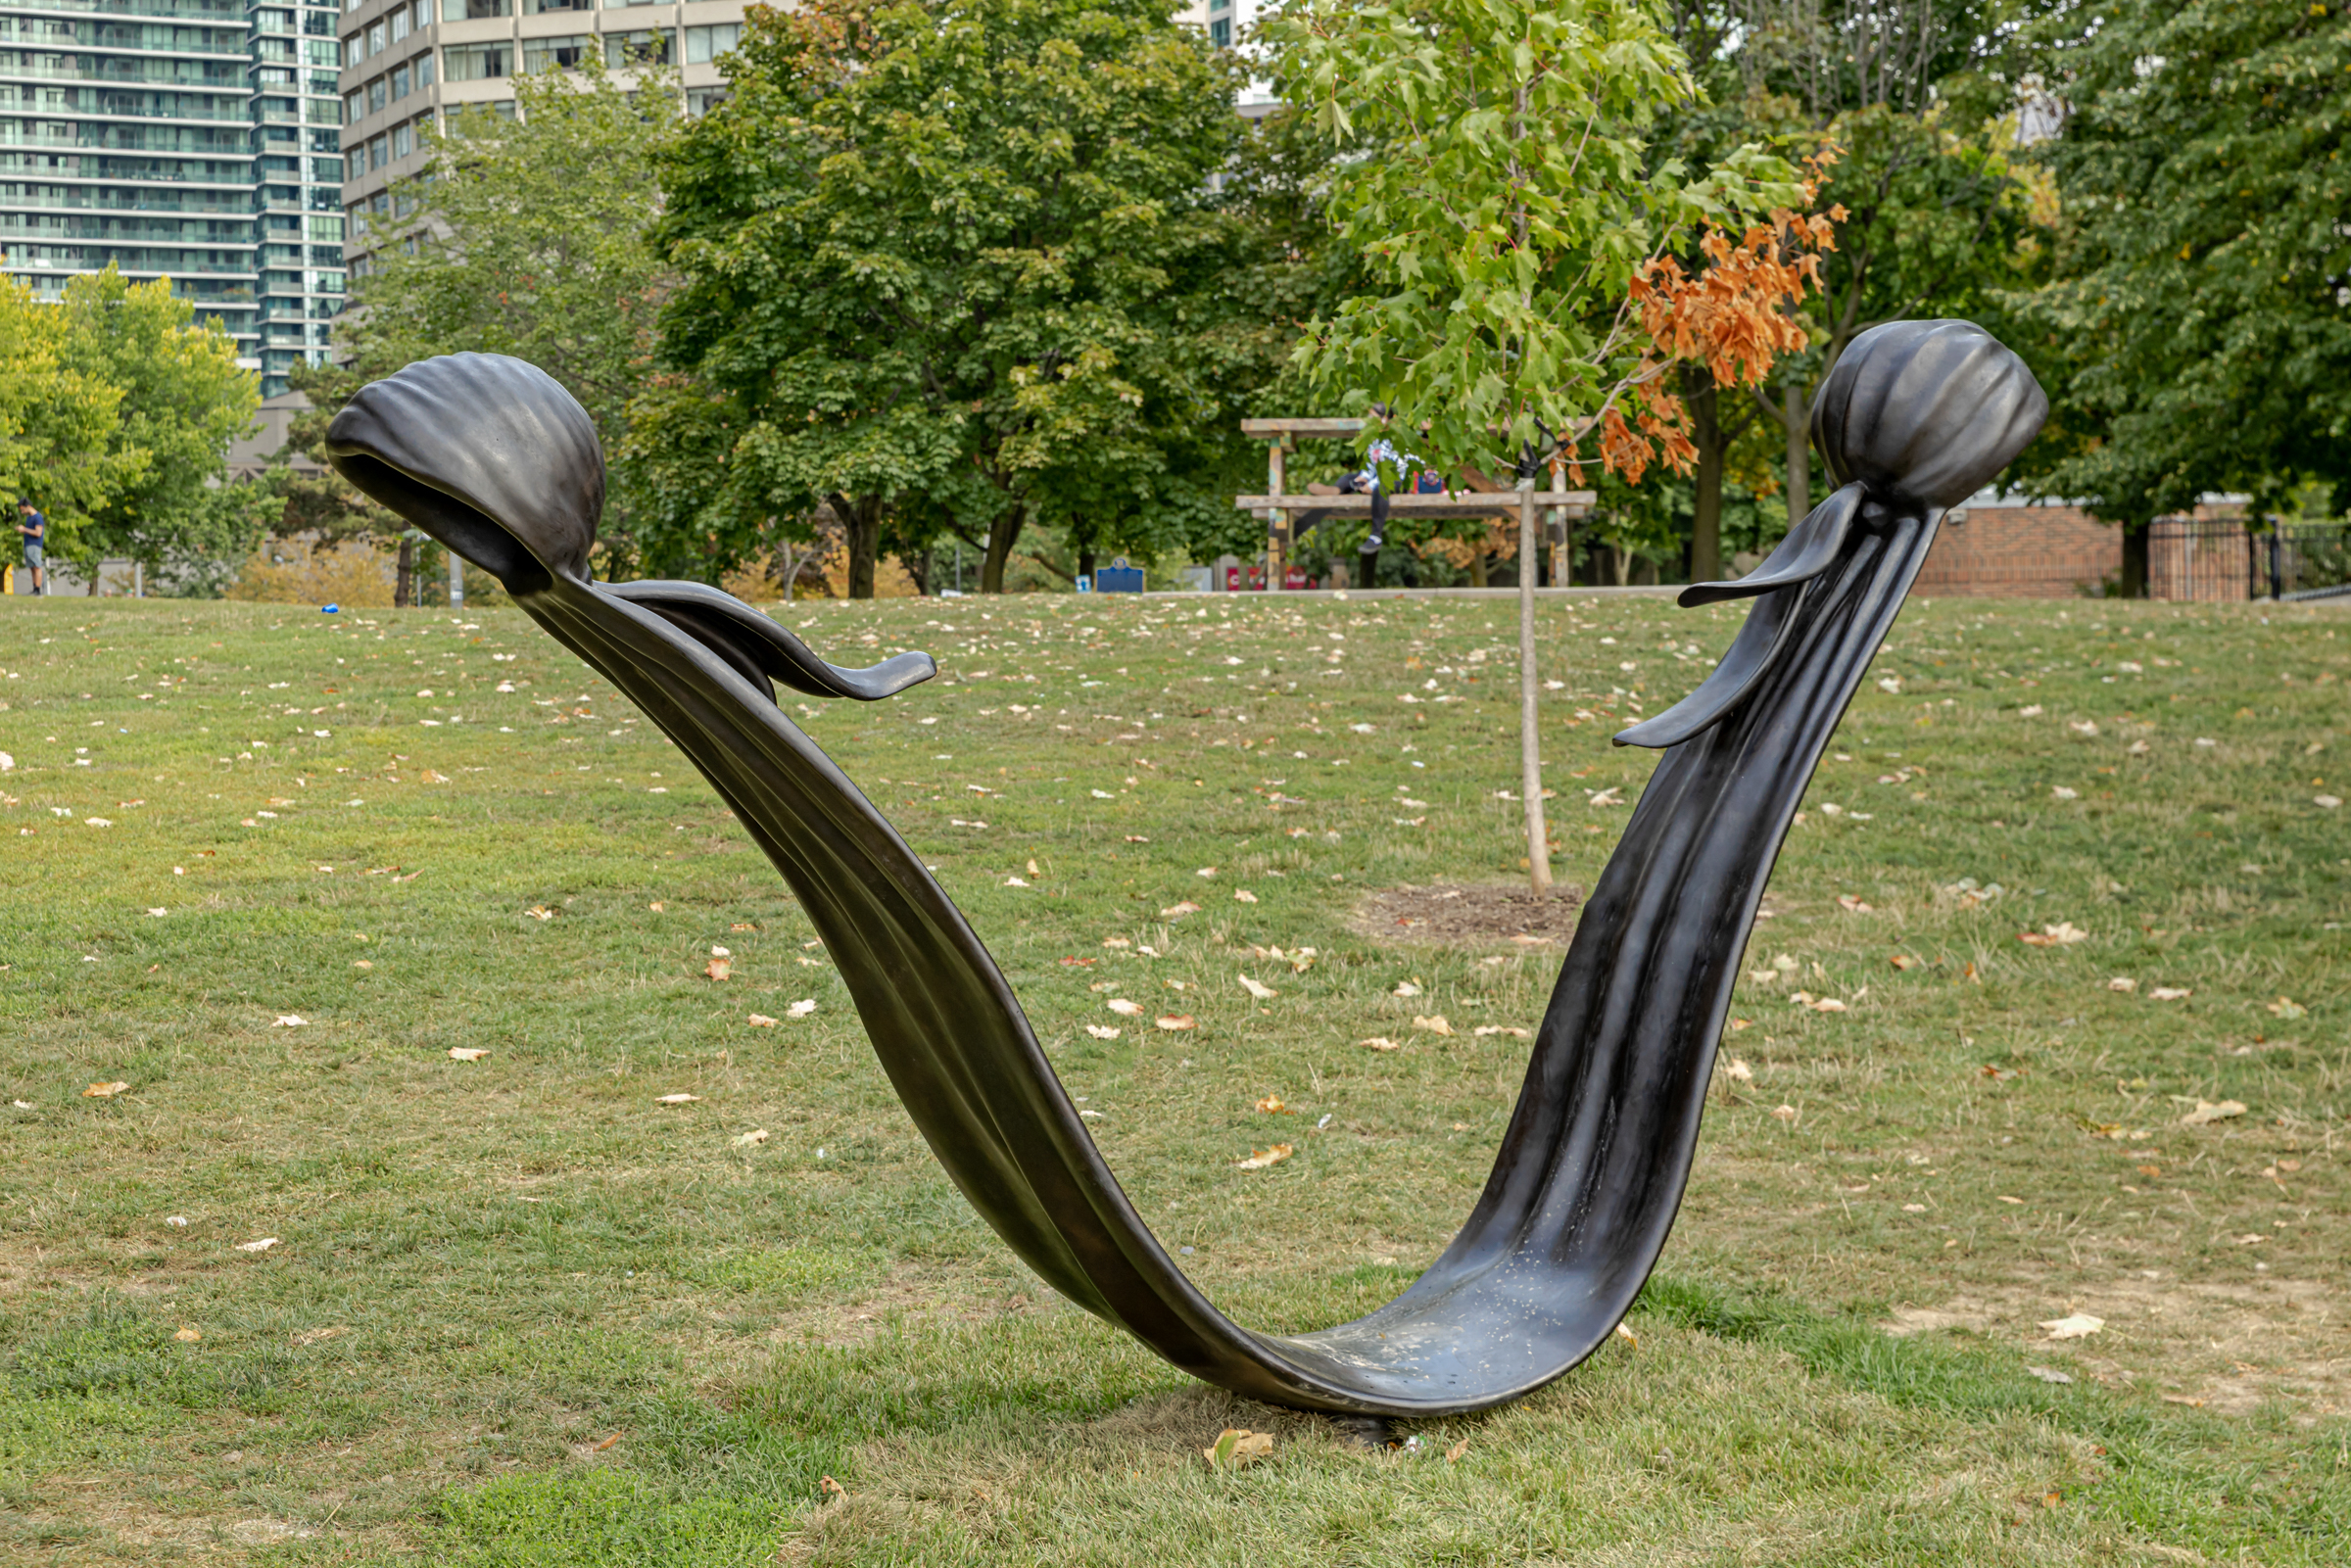     Esmaa Mohamoud, The Brotherhood FUBU (For Us, By Us), (bronze), installation view, Harbour Square Park, Toronto, 2022. Courtesy of the artist. Photo: Toni Hafkenscheid

